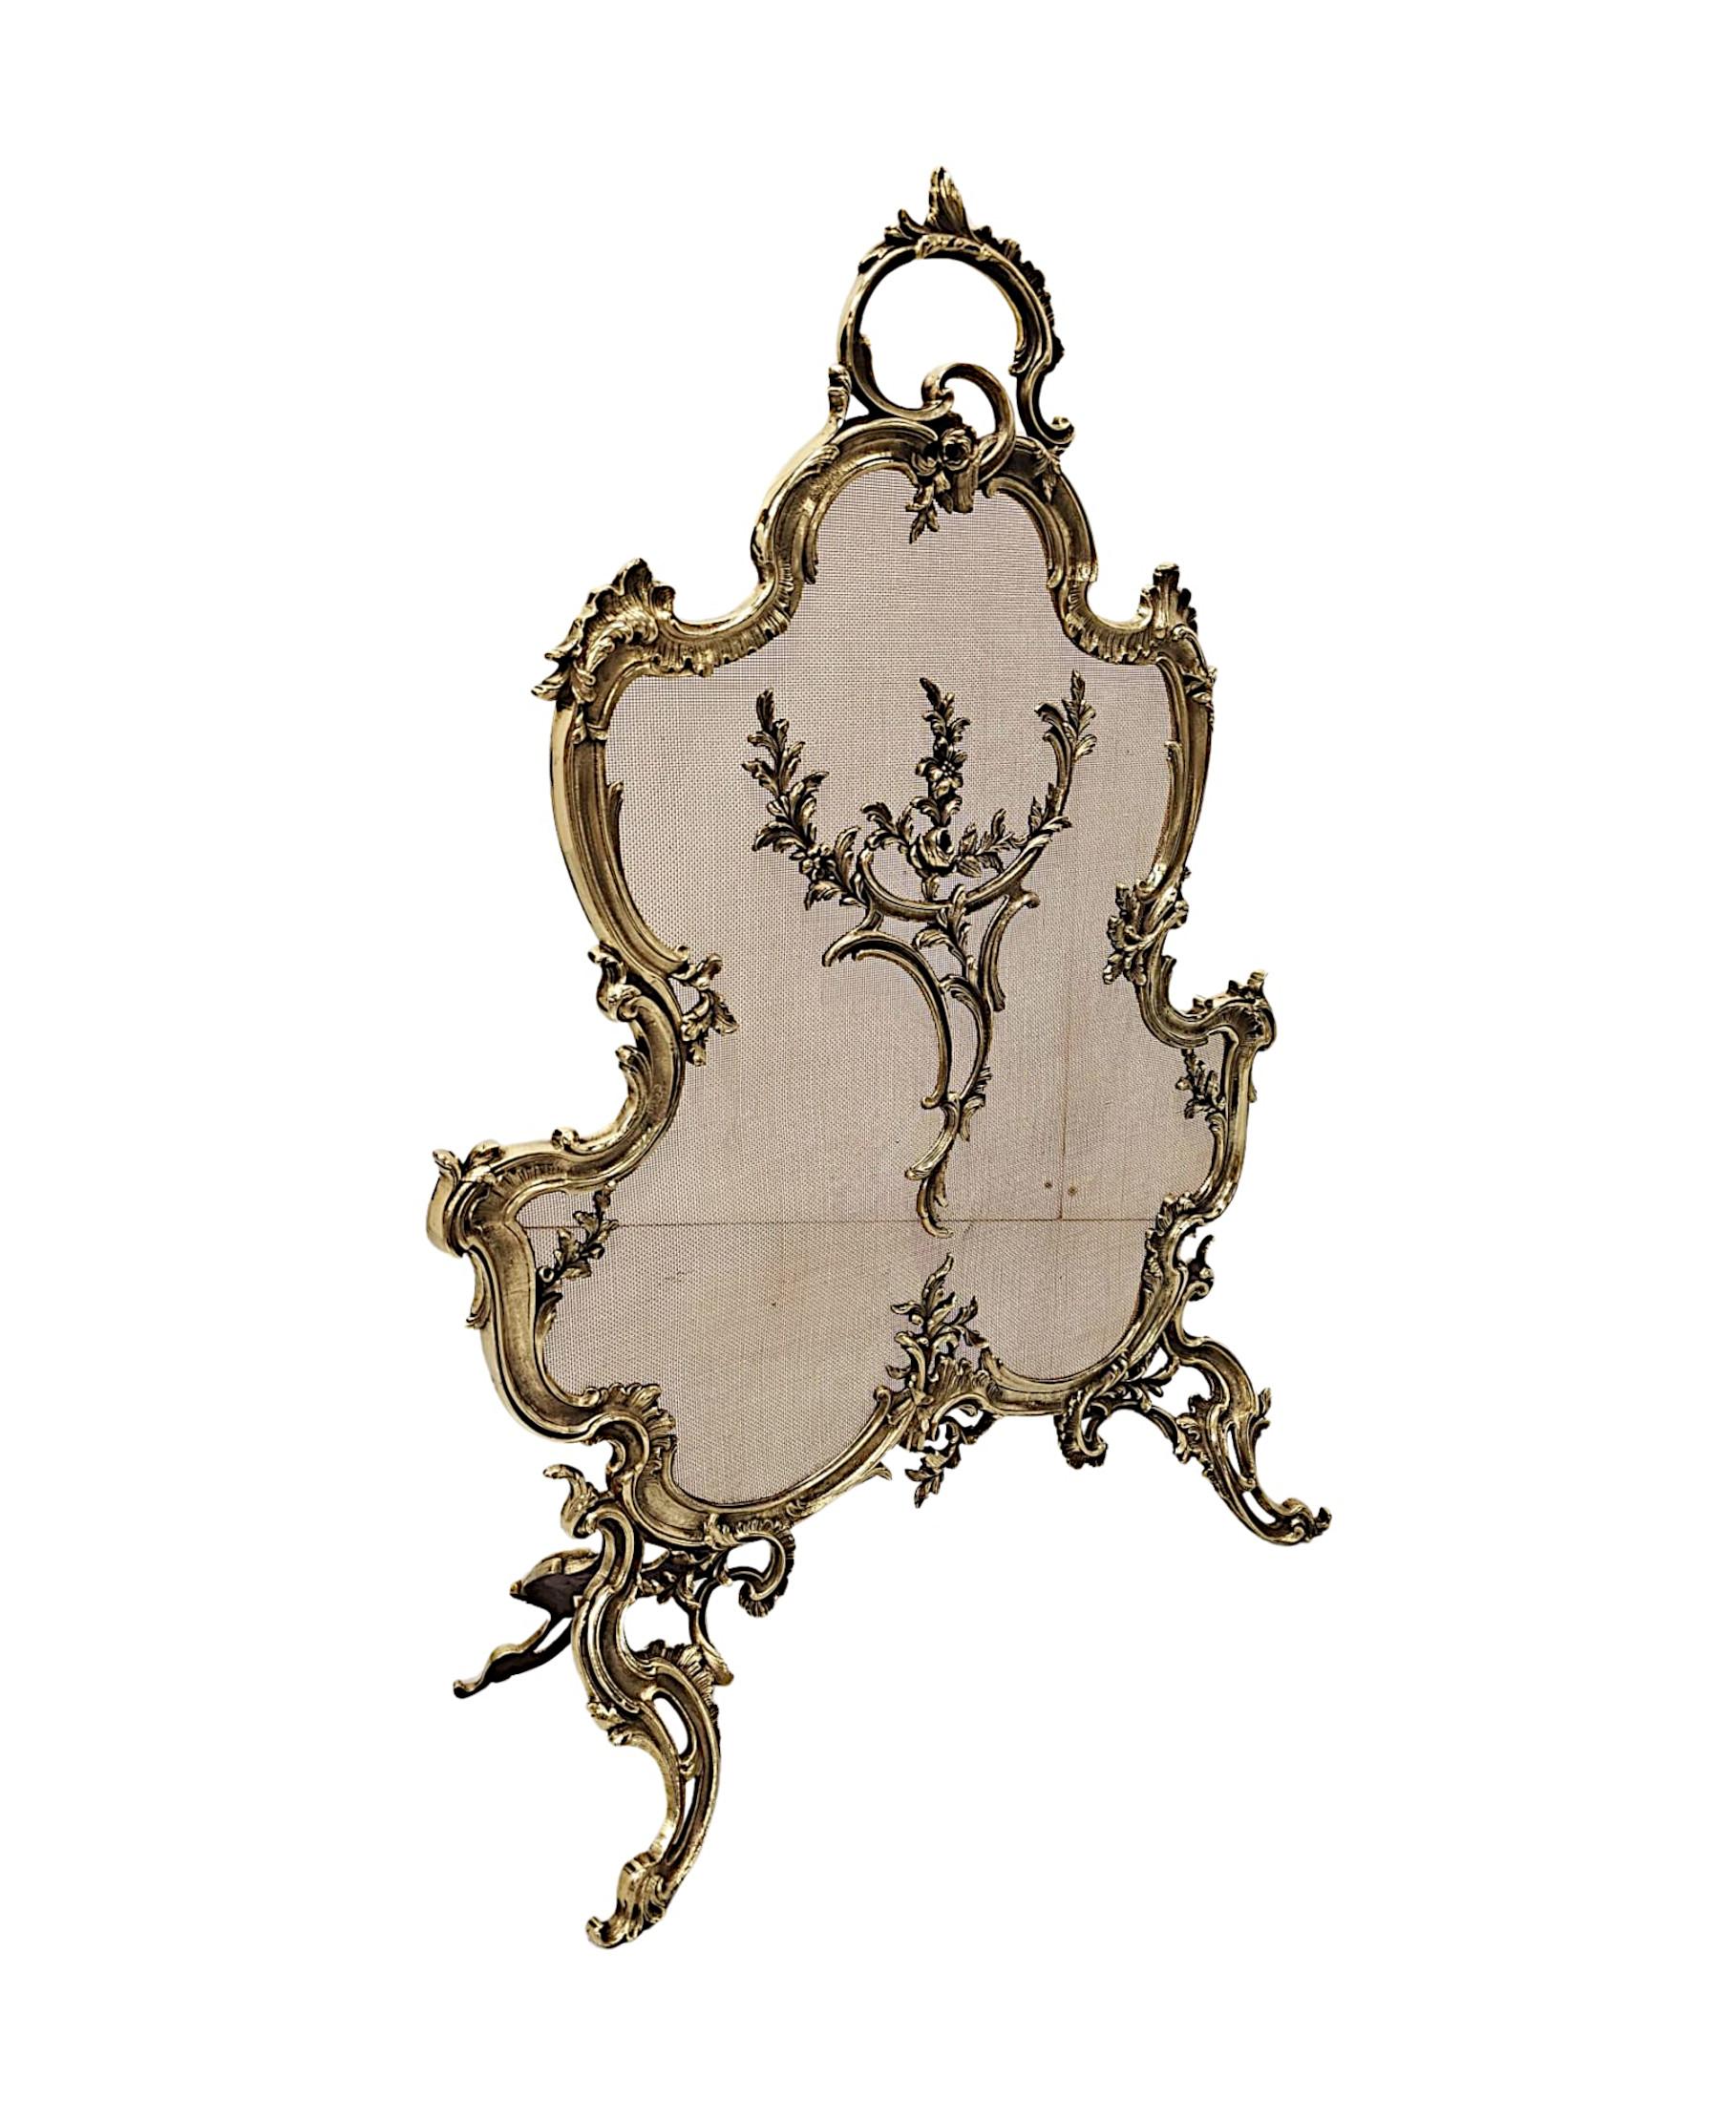 A fabulous 19th Century polished brass fire screen in the Rococo manner, fully restored and of exceptional quality.  The shaped and curved protective wire mesh is set within an intricately detailed cast brass frame with beautiful motifs comprising